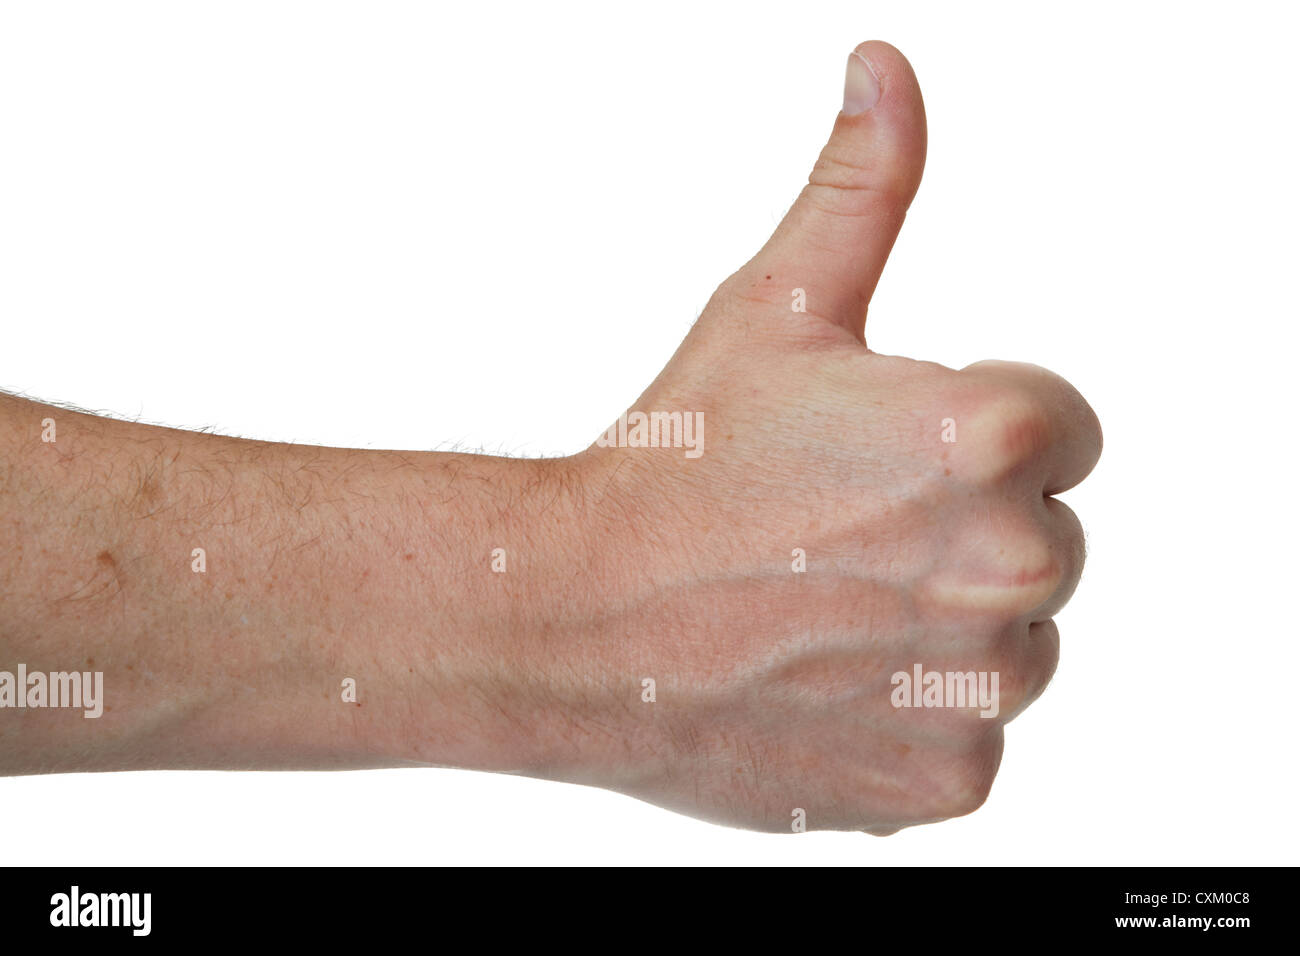 Thumbs up. Male hand gesture on plain white.  Cut Out Stock Photo